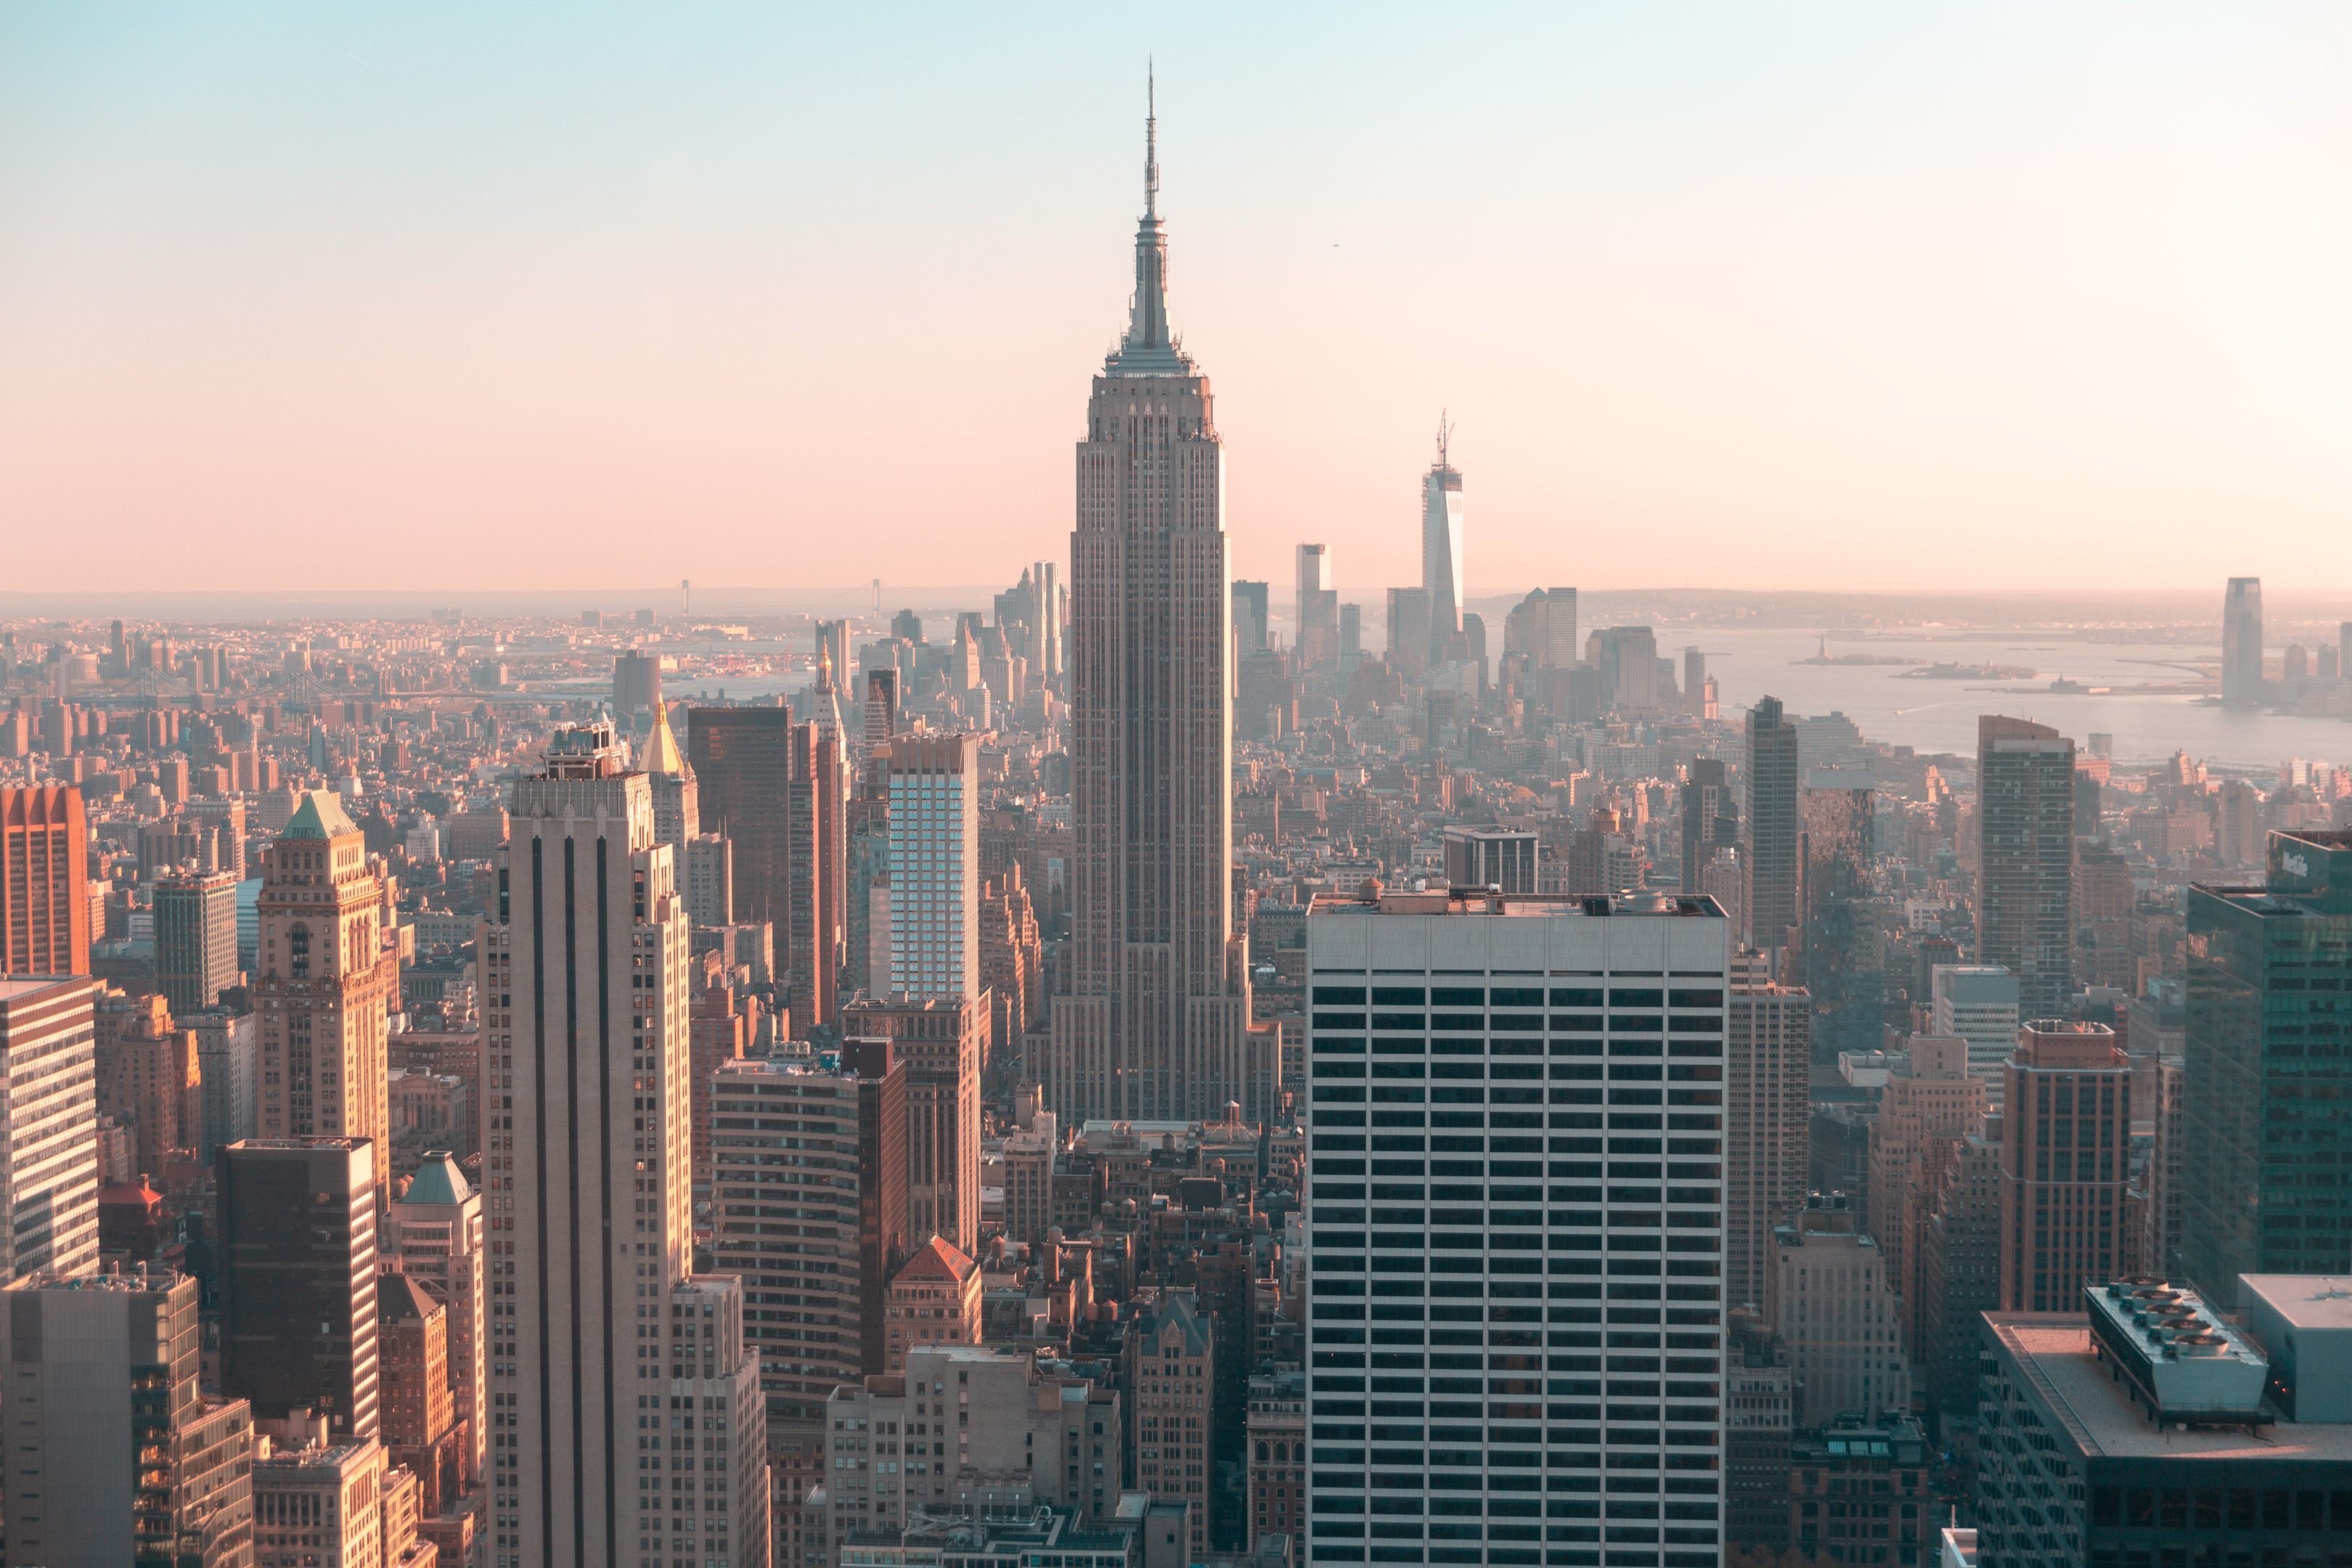 The Empire State Building is on of the architectural wonders of the world | Photo by Roberto Vivancos from Pexels